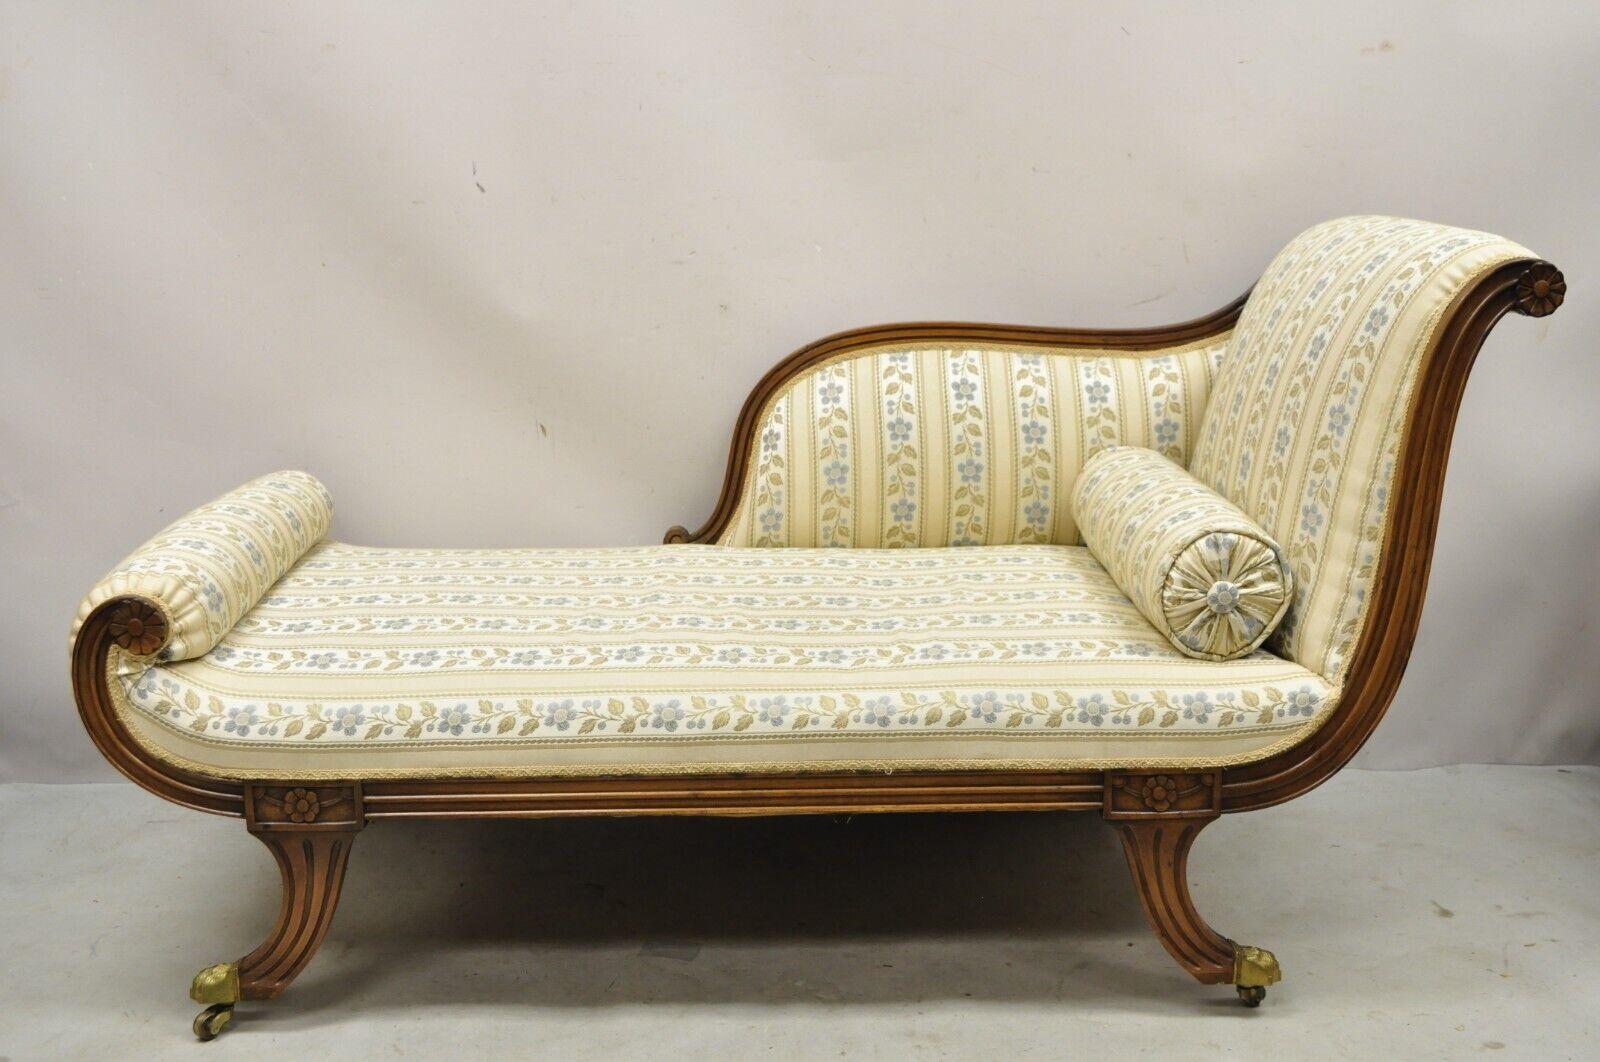 Vintage Regency Style Carved Mahogany Saber Leg Chaise Lounge Sofa Recamier. Item features carved mahogany wood frame, brass capped paw feet on casters, blue and gold striped upholstery, shapely saber legs, very nice vintage item, great style and